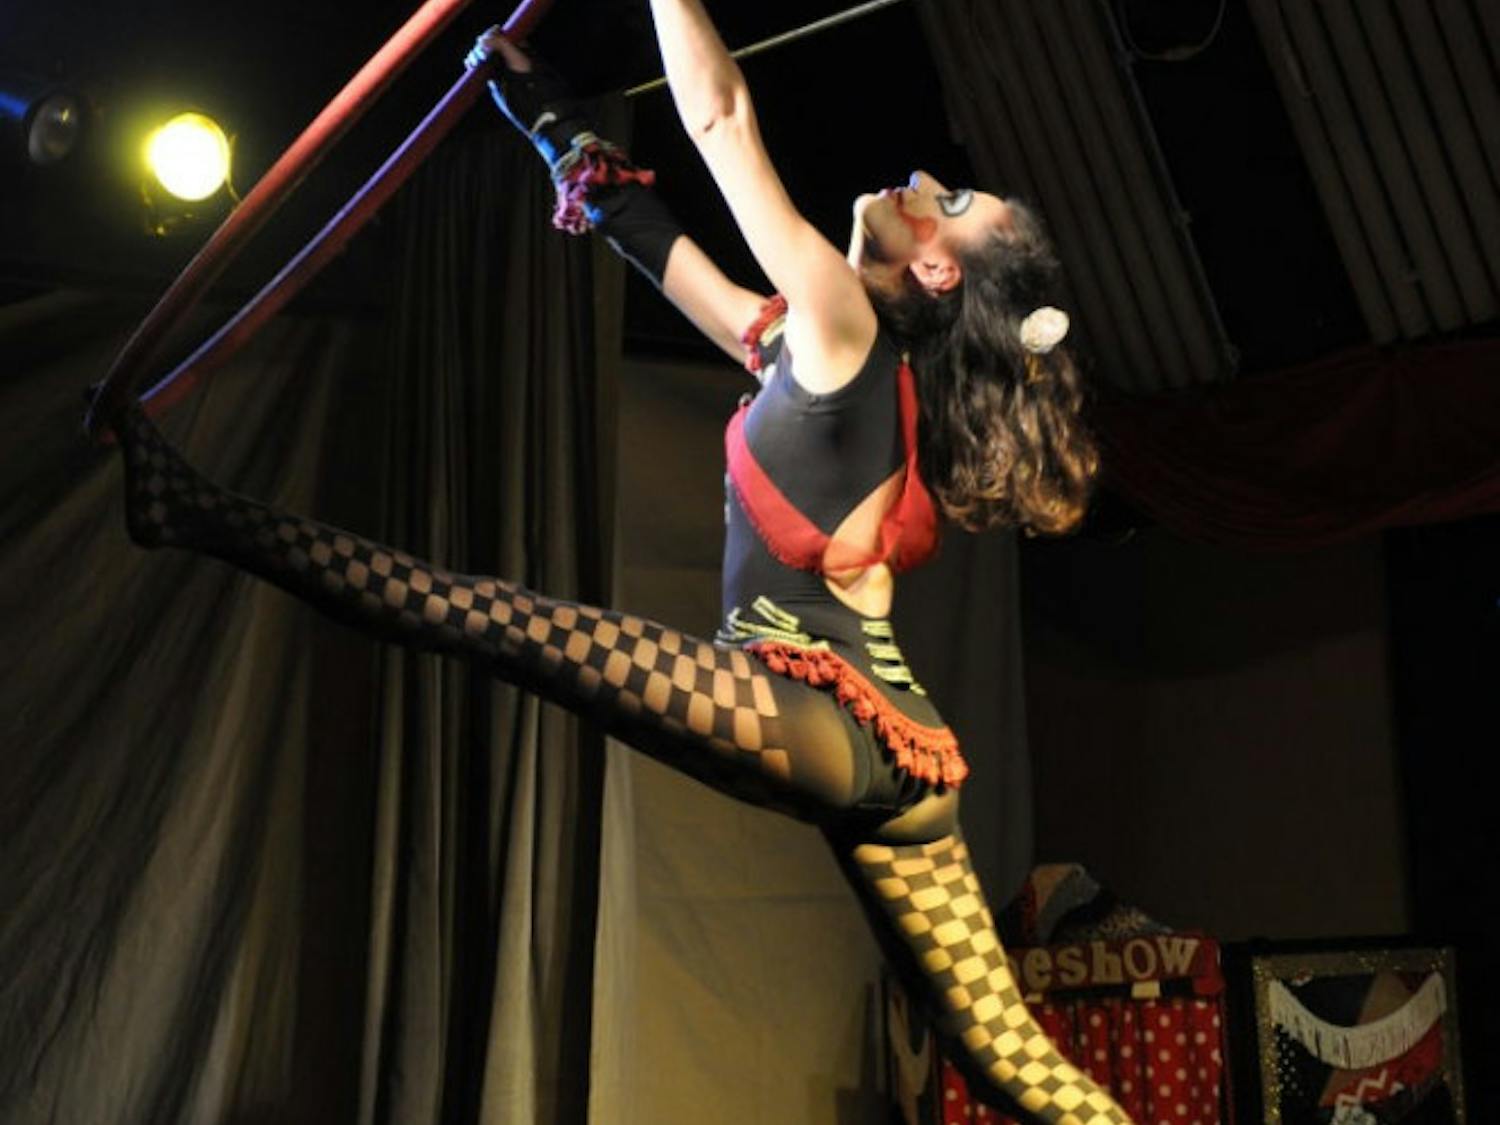 Lira Linx performs Saturday at Dr. Sinn’s Freak Island Musical Sideshow. The show runs again this weekend at The Library at Market Street on Saturday at 7 p.m.